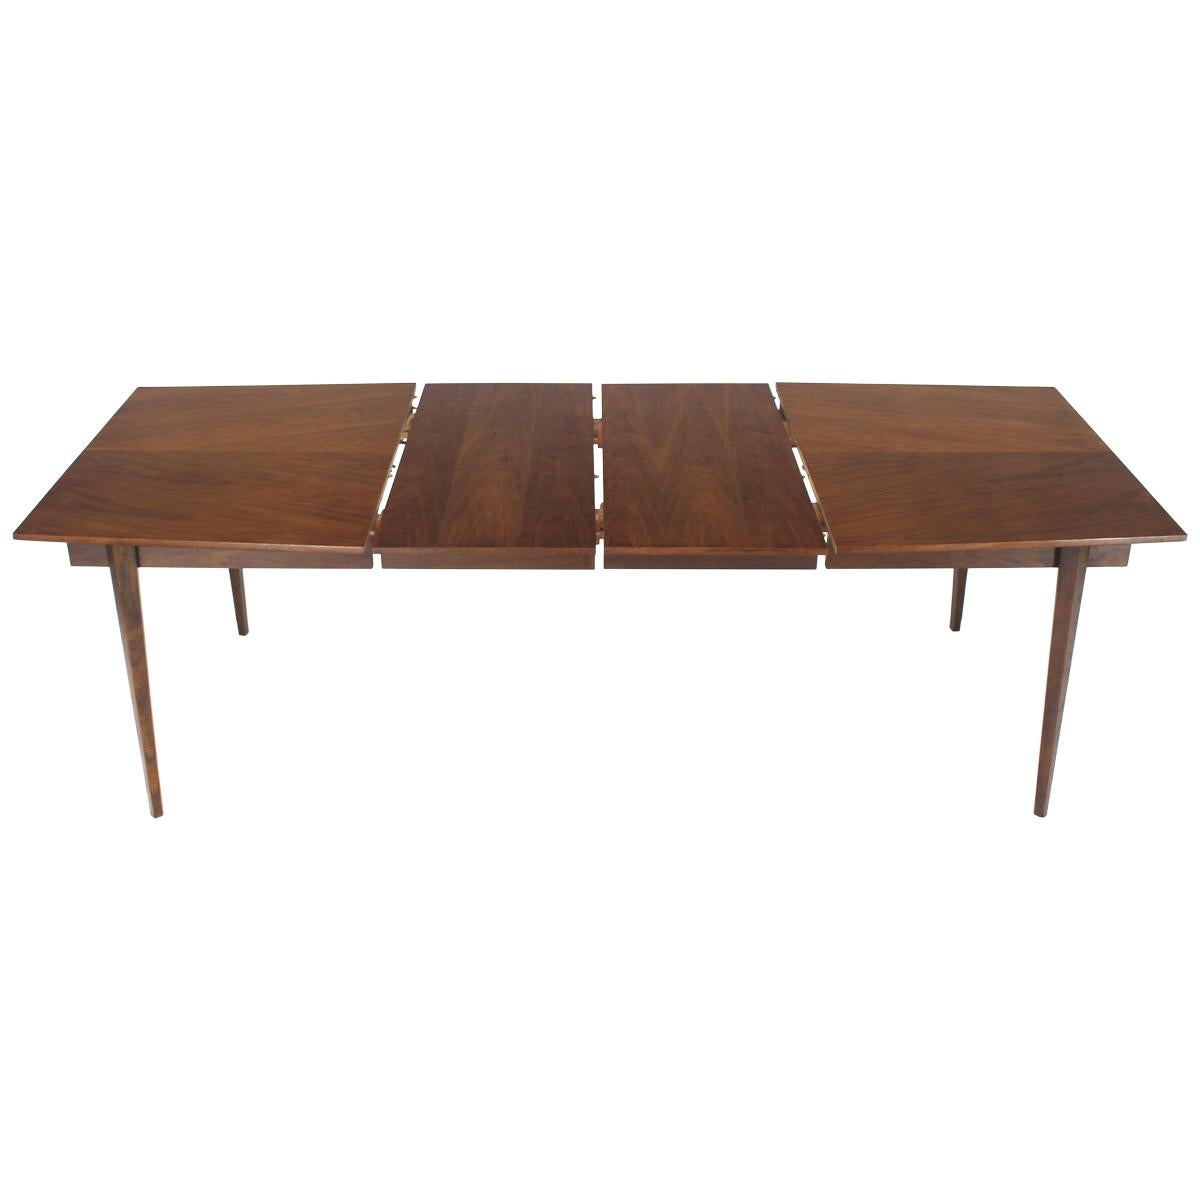 Danish Mid-Century Modern Walnut Wide Rectangle Dining Table 2 Extension Boards For Sale